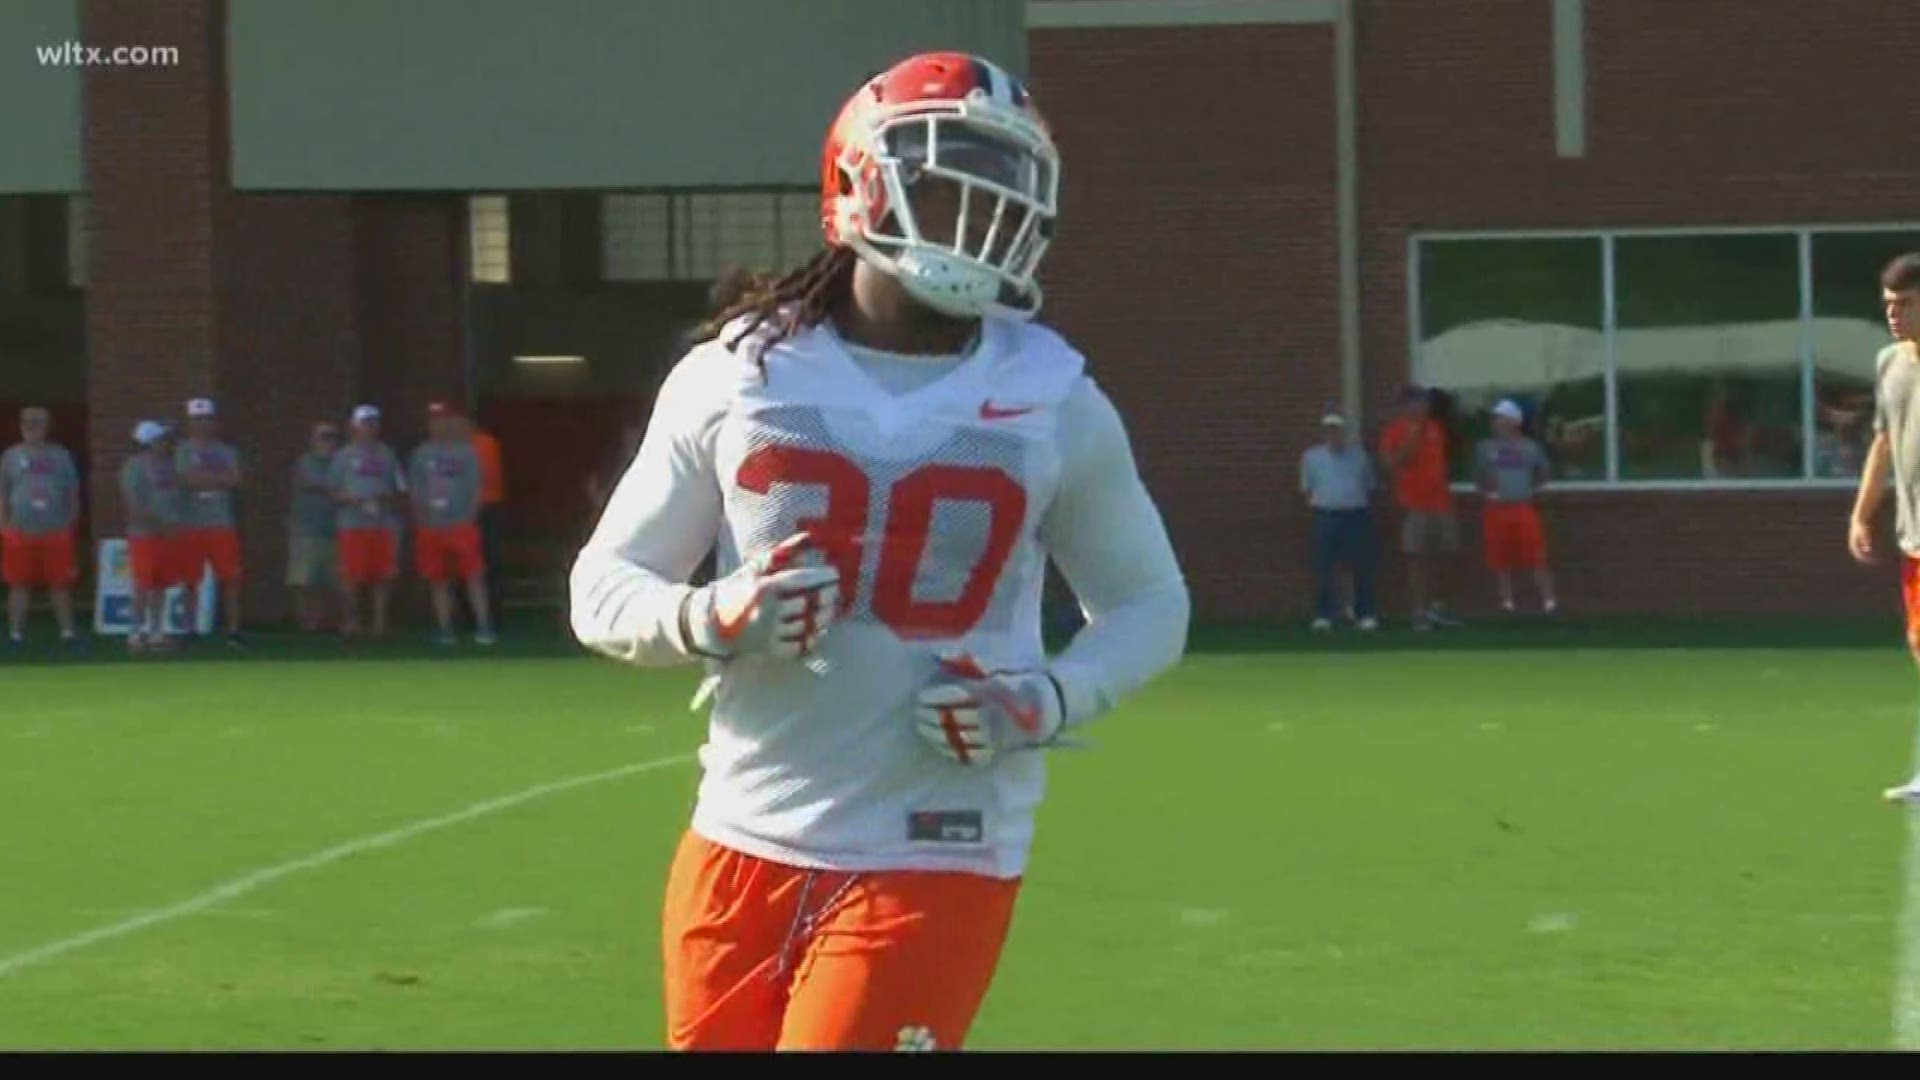 The second-ranked Clemson Tigers have cranked up the preseason with the mindset that it's about continuing the process of being a consistent program.